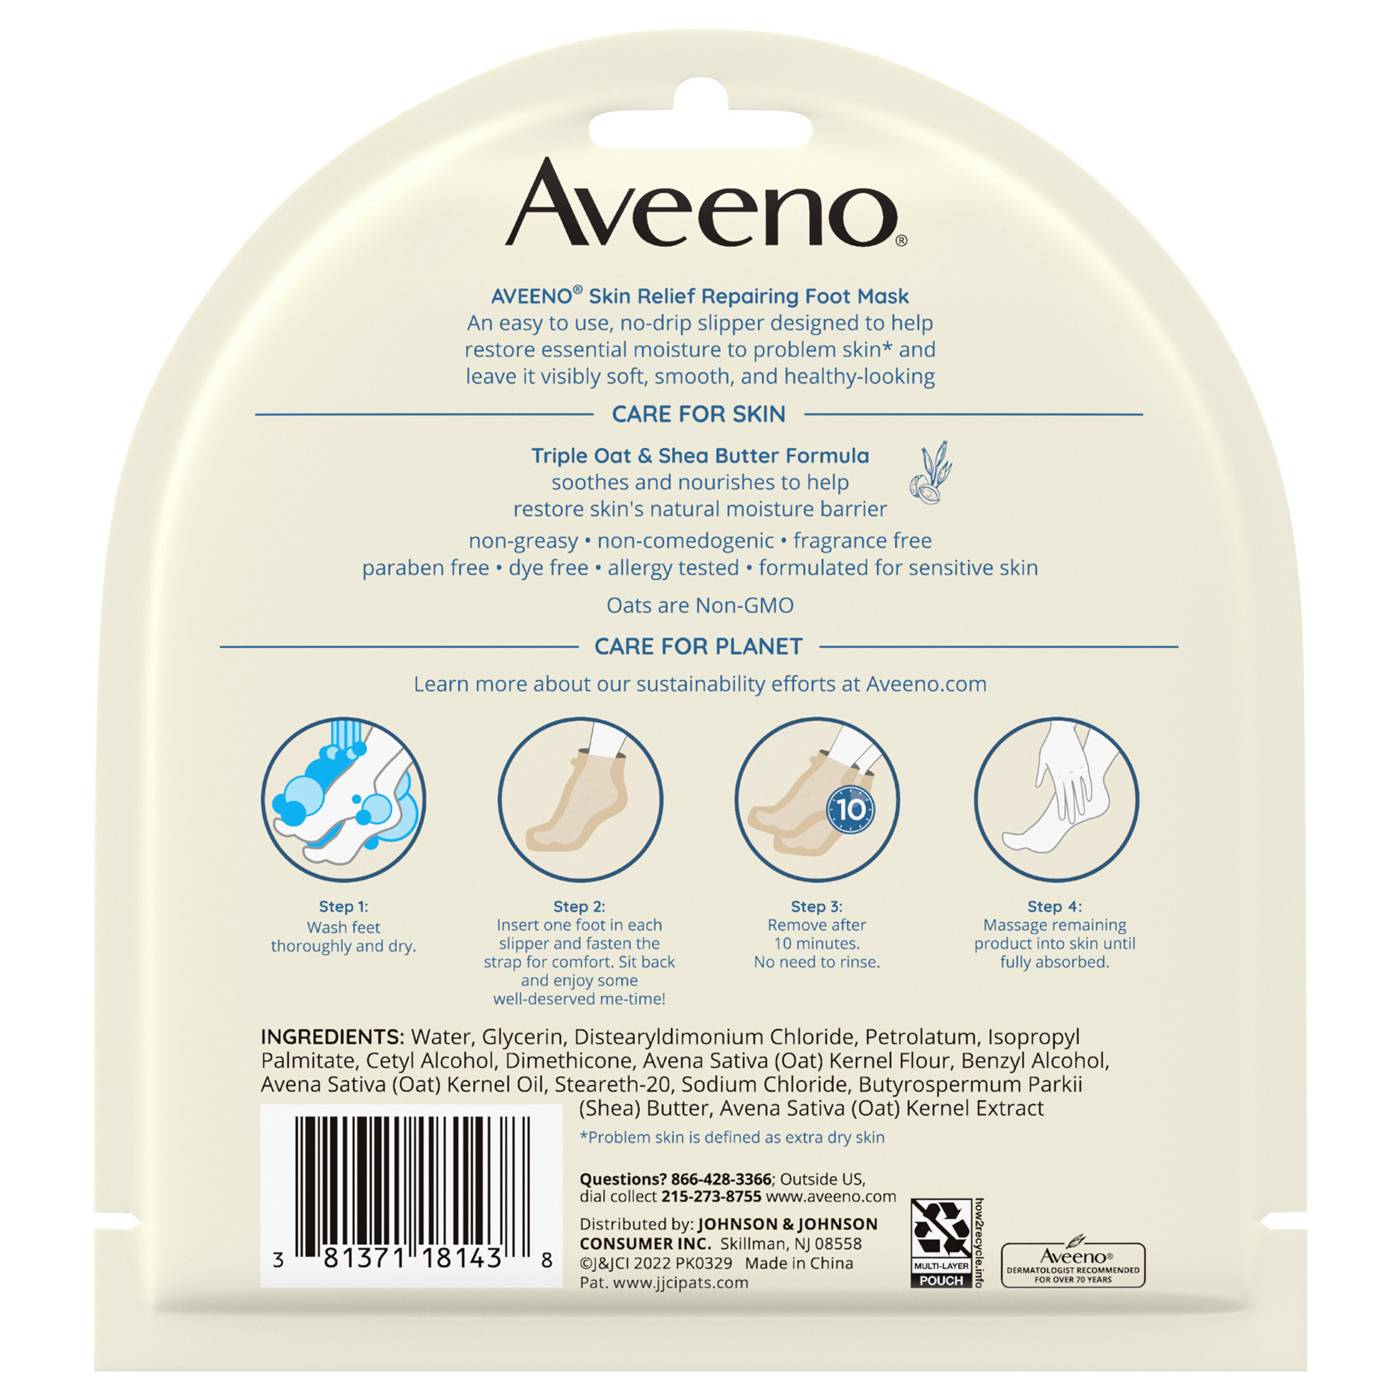 Aveeno Skin Relief Repairing Foot Mask 2 Single-Use Slippers; image 3 of 3